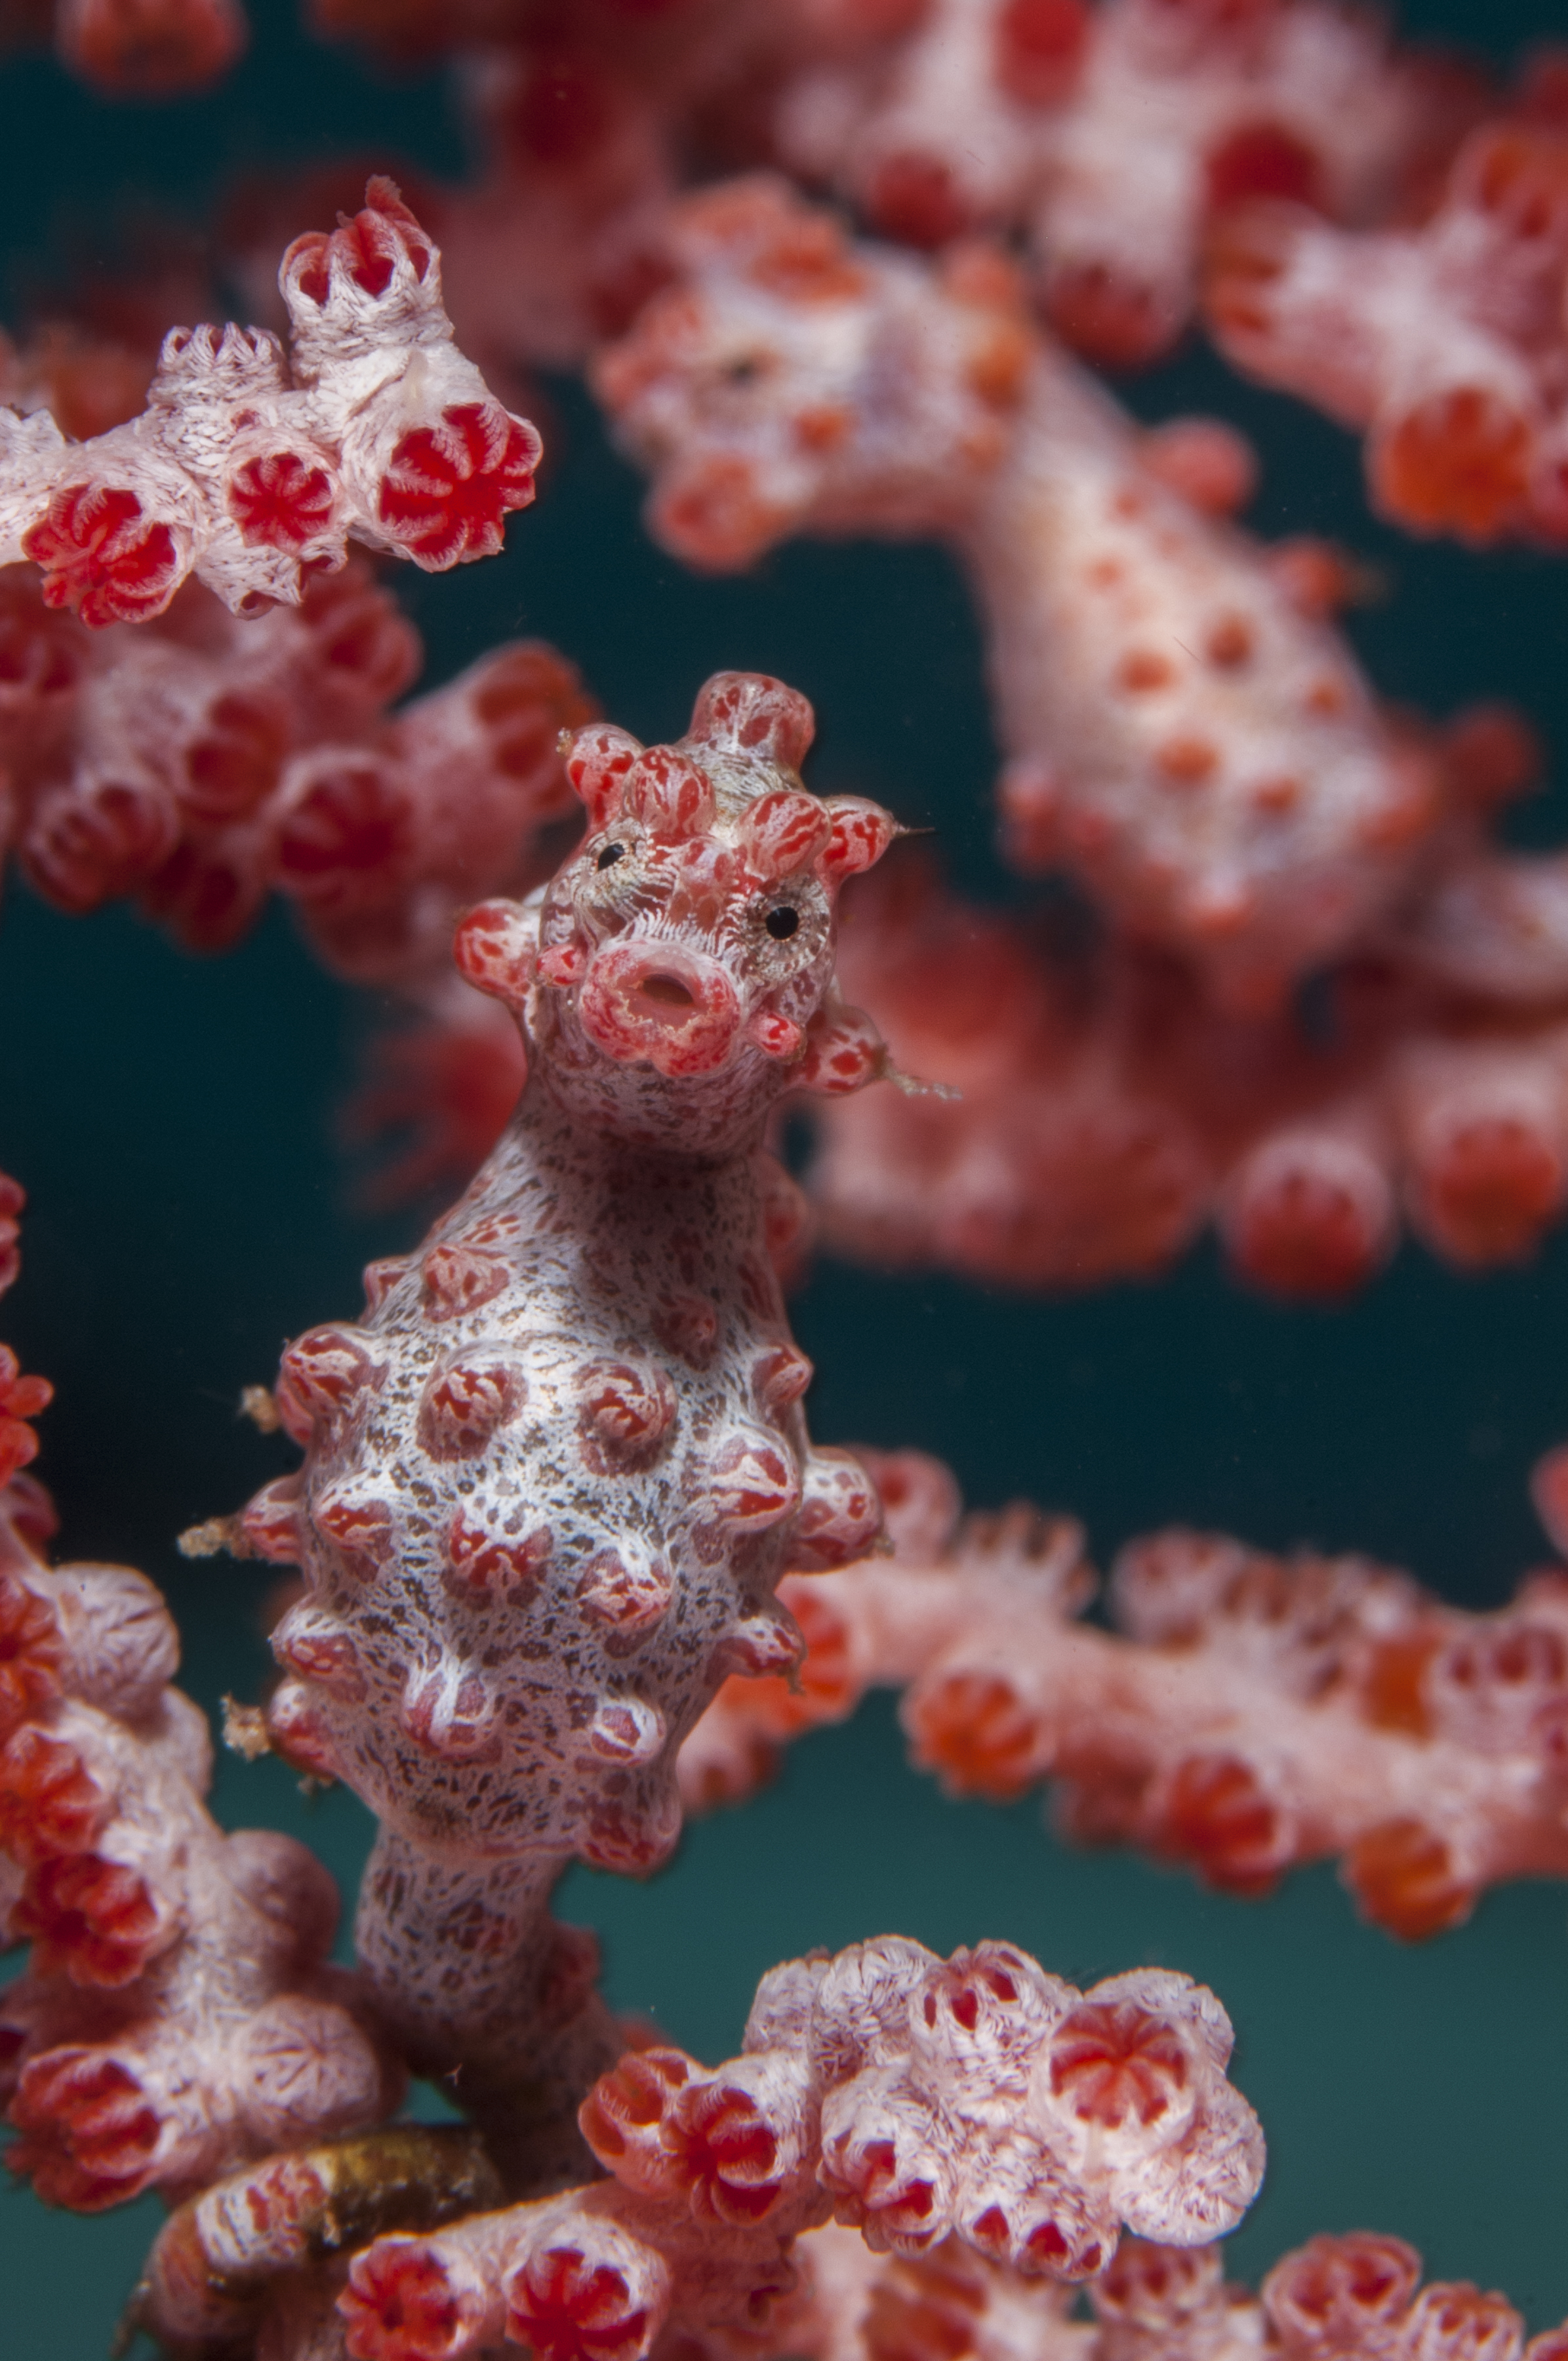 A pair of tiny and well-camouflaged Bargibant’s pygmy seahorses, Sulawesi, Indonesia. Photo by Dr Richard Smith